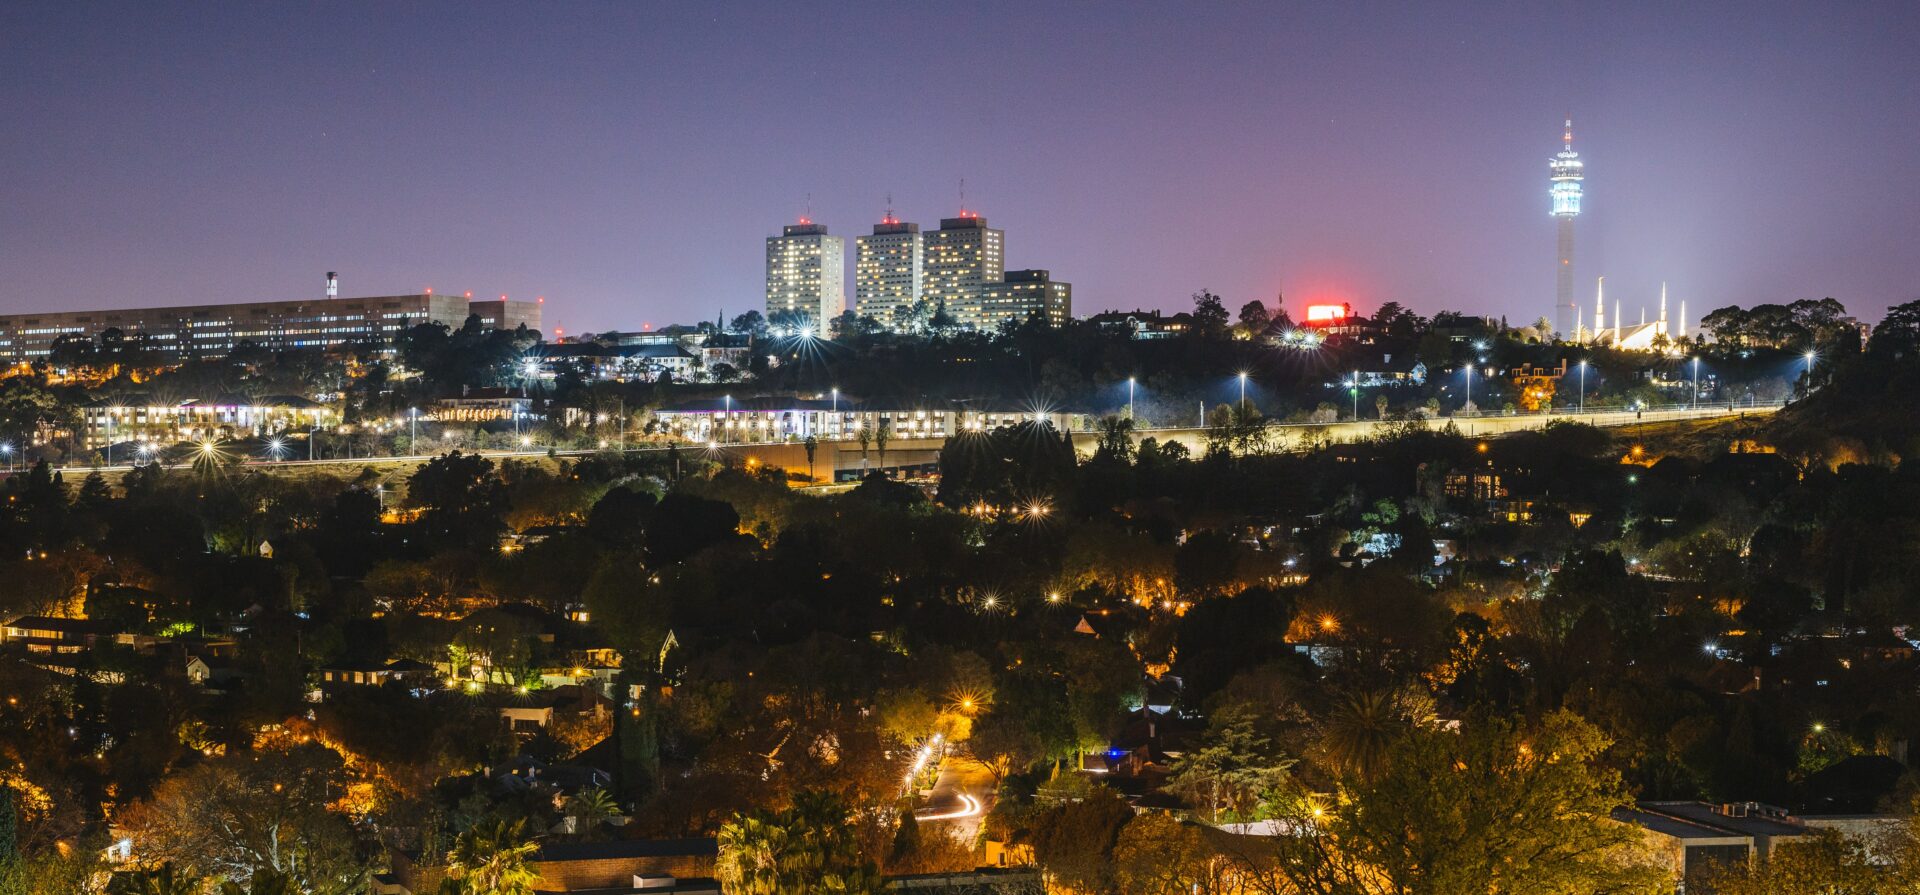 Here are 10 things you can do in Johannesburg on a budget